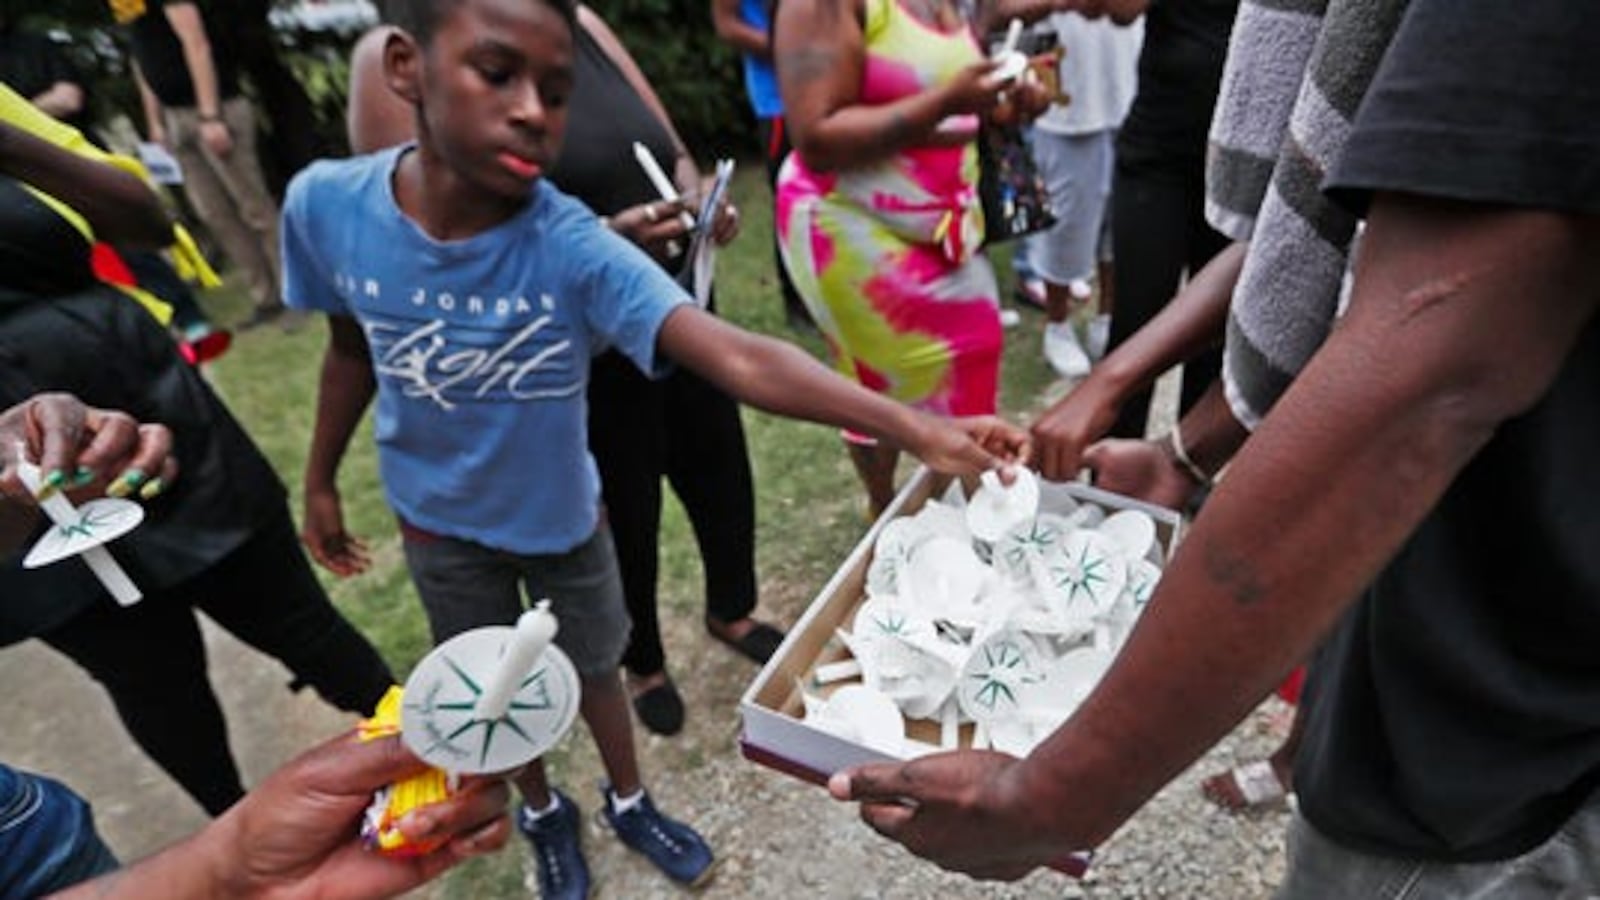 Candles are passed out as community members gather near the Frayser home of Brandon Webber on Friday, June 14, 2019.